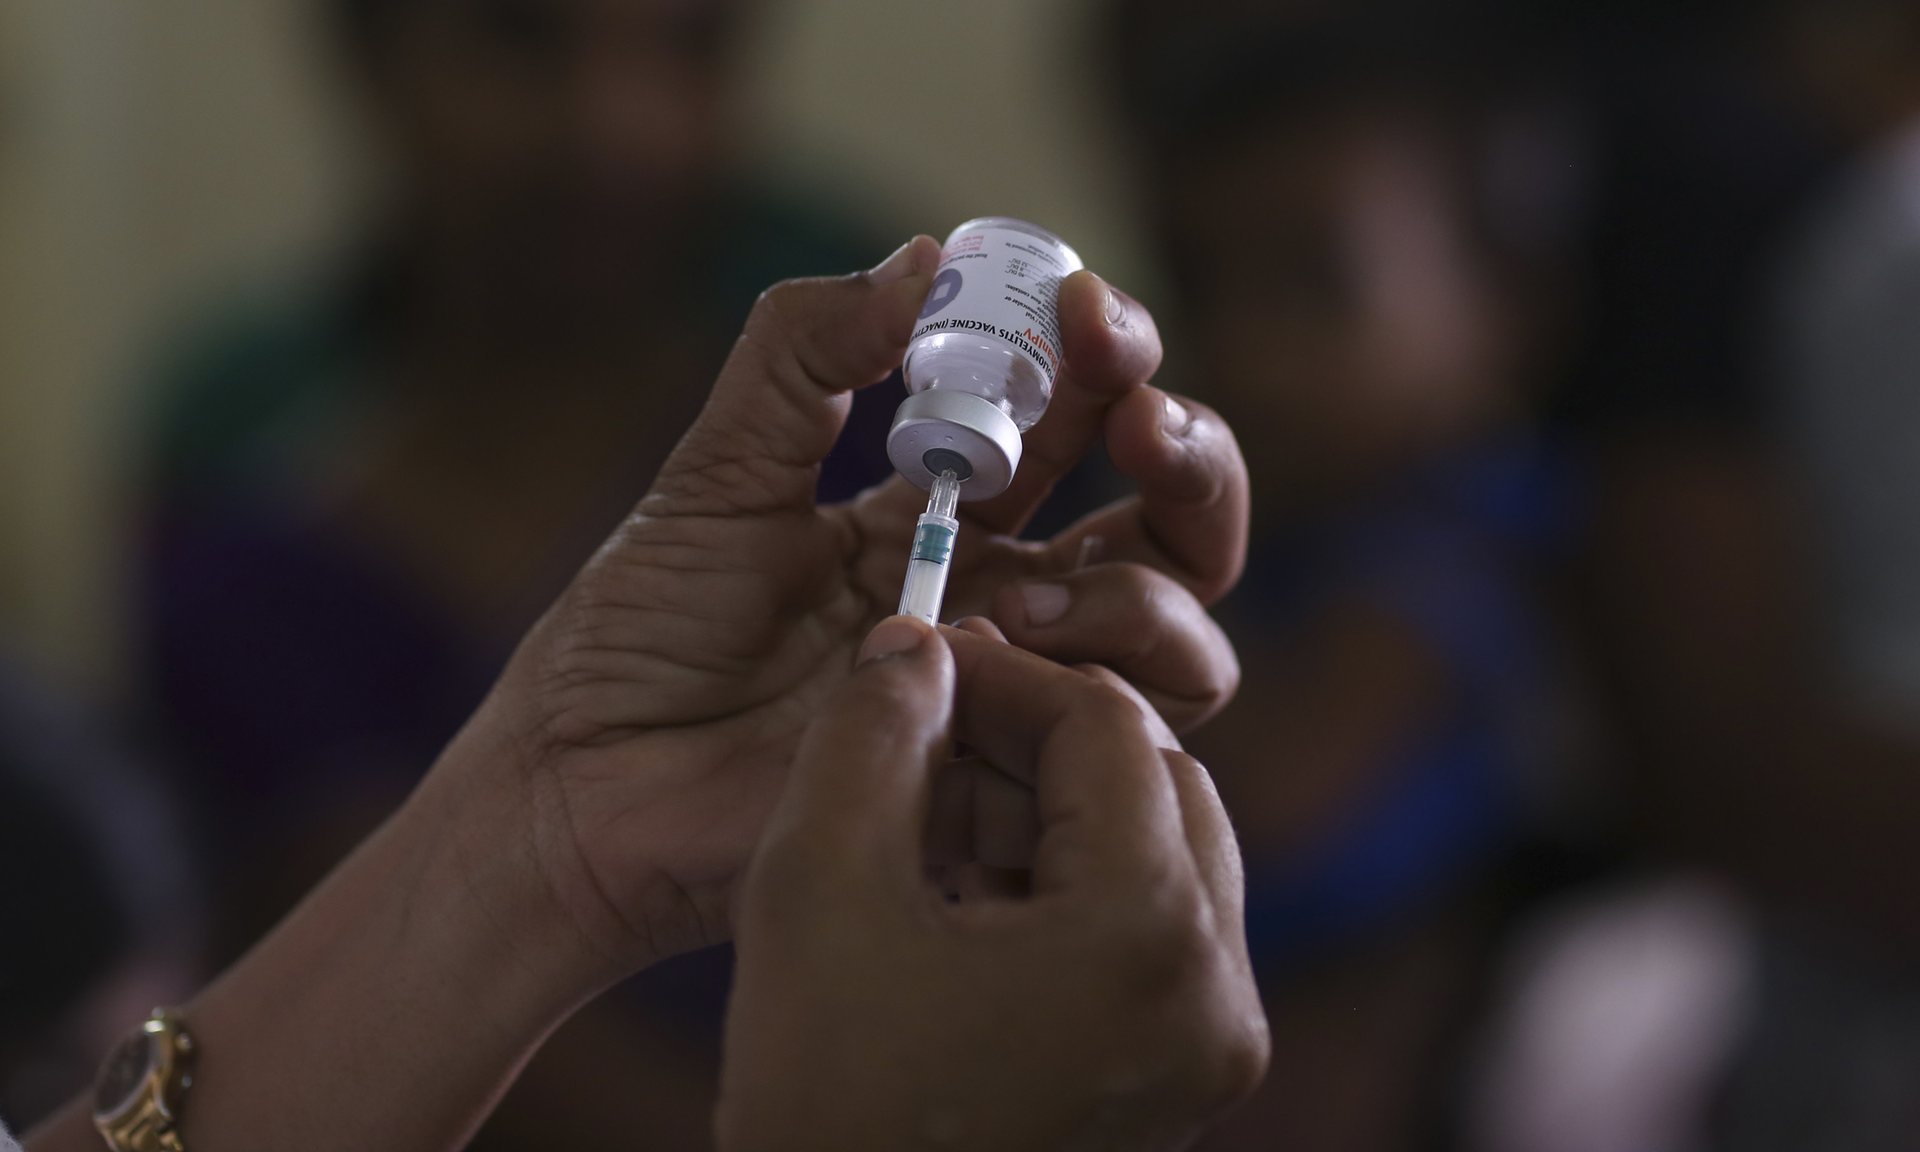 As cities across the world become more crowded, the storage and supply of vaccine doses will be critical to maintaining global health. Photograph: Mahesh Kumar A/AP